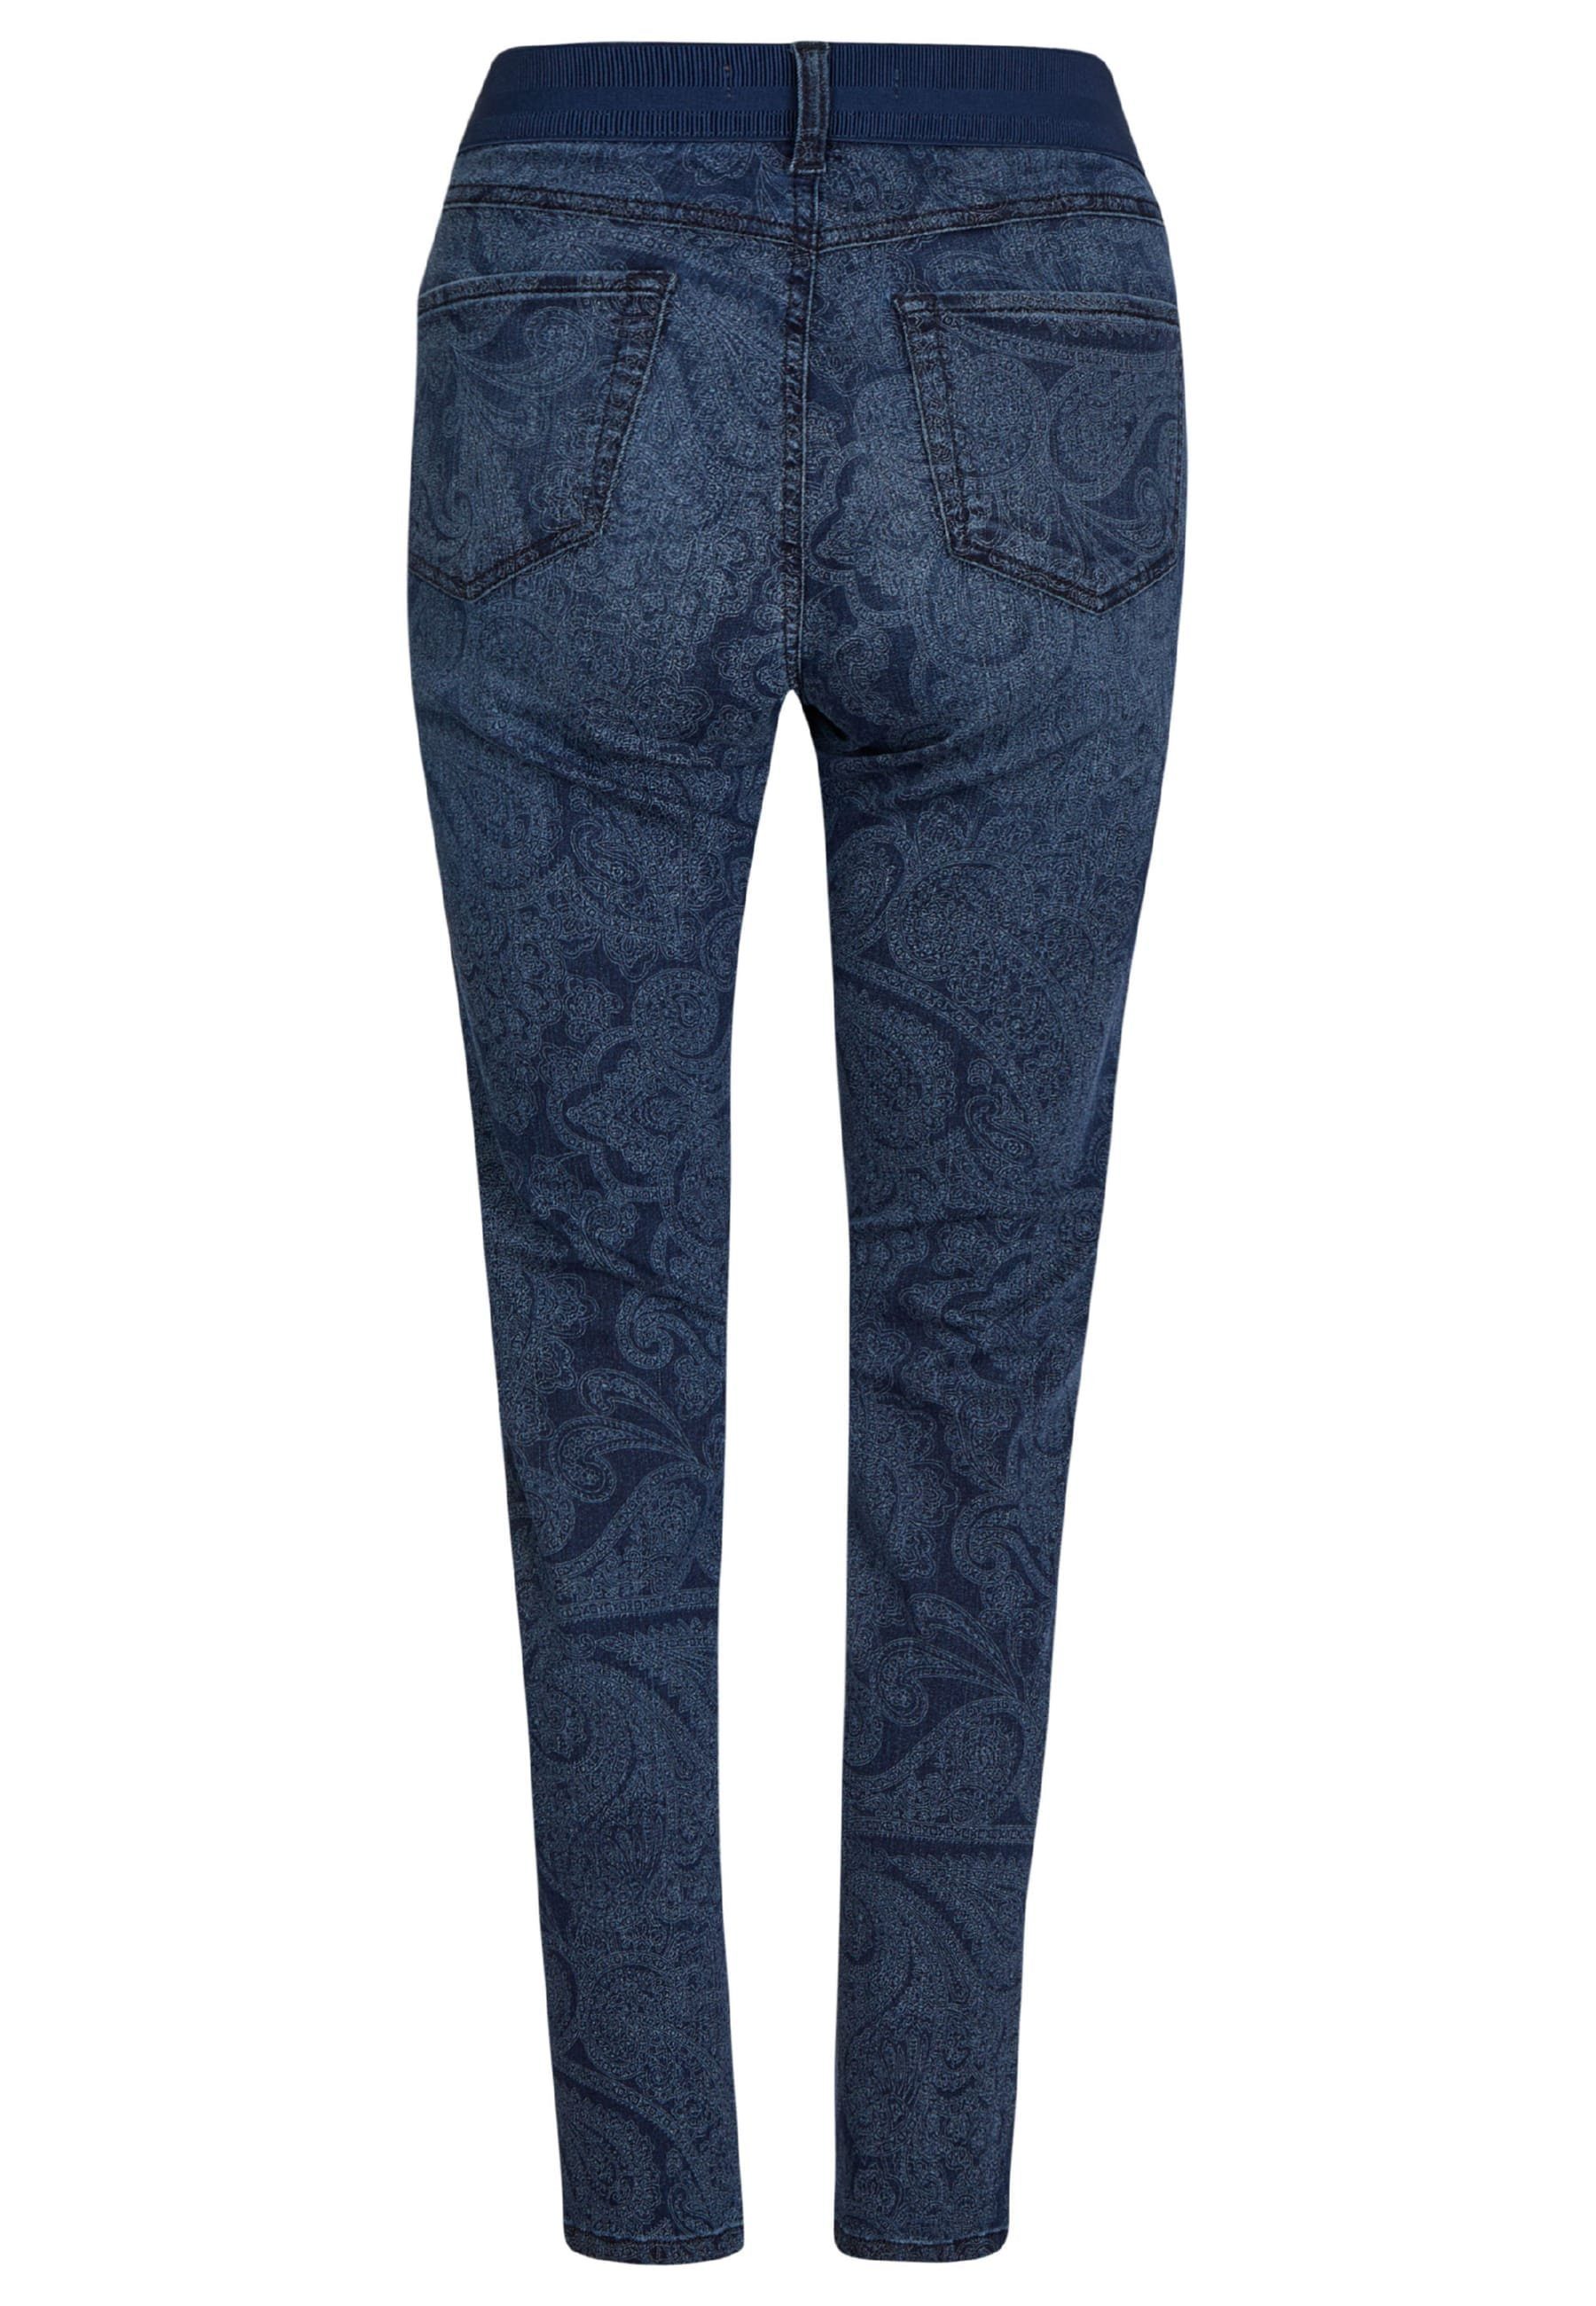 ANGELS Slim-fit-Jeans One Paisley-Muster Label-Applikationen Jeans blue mit mit Size